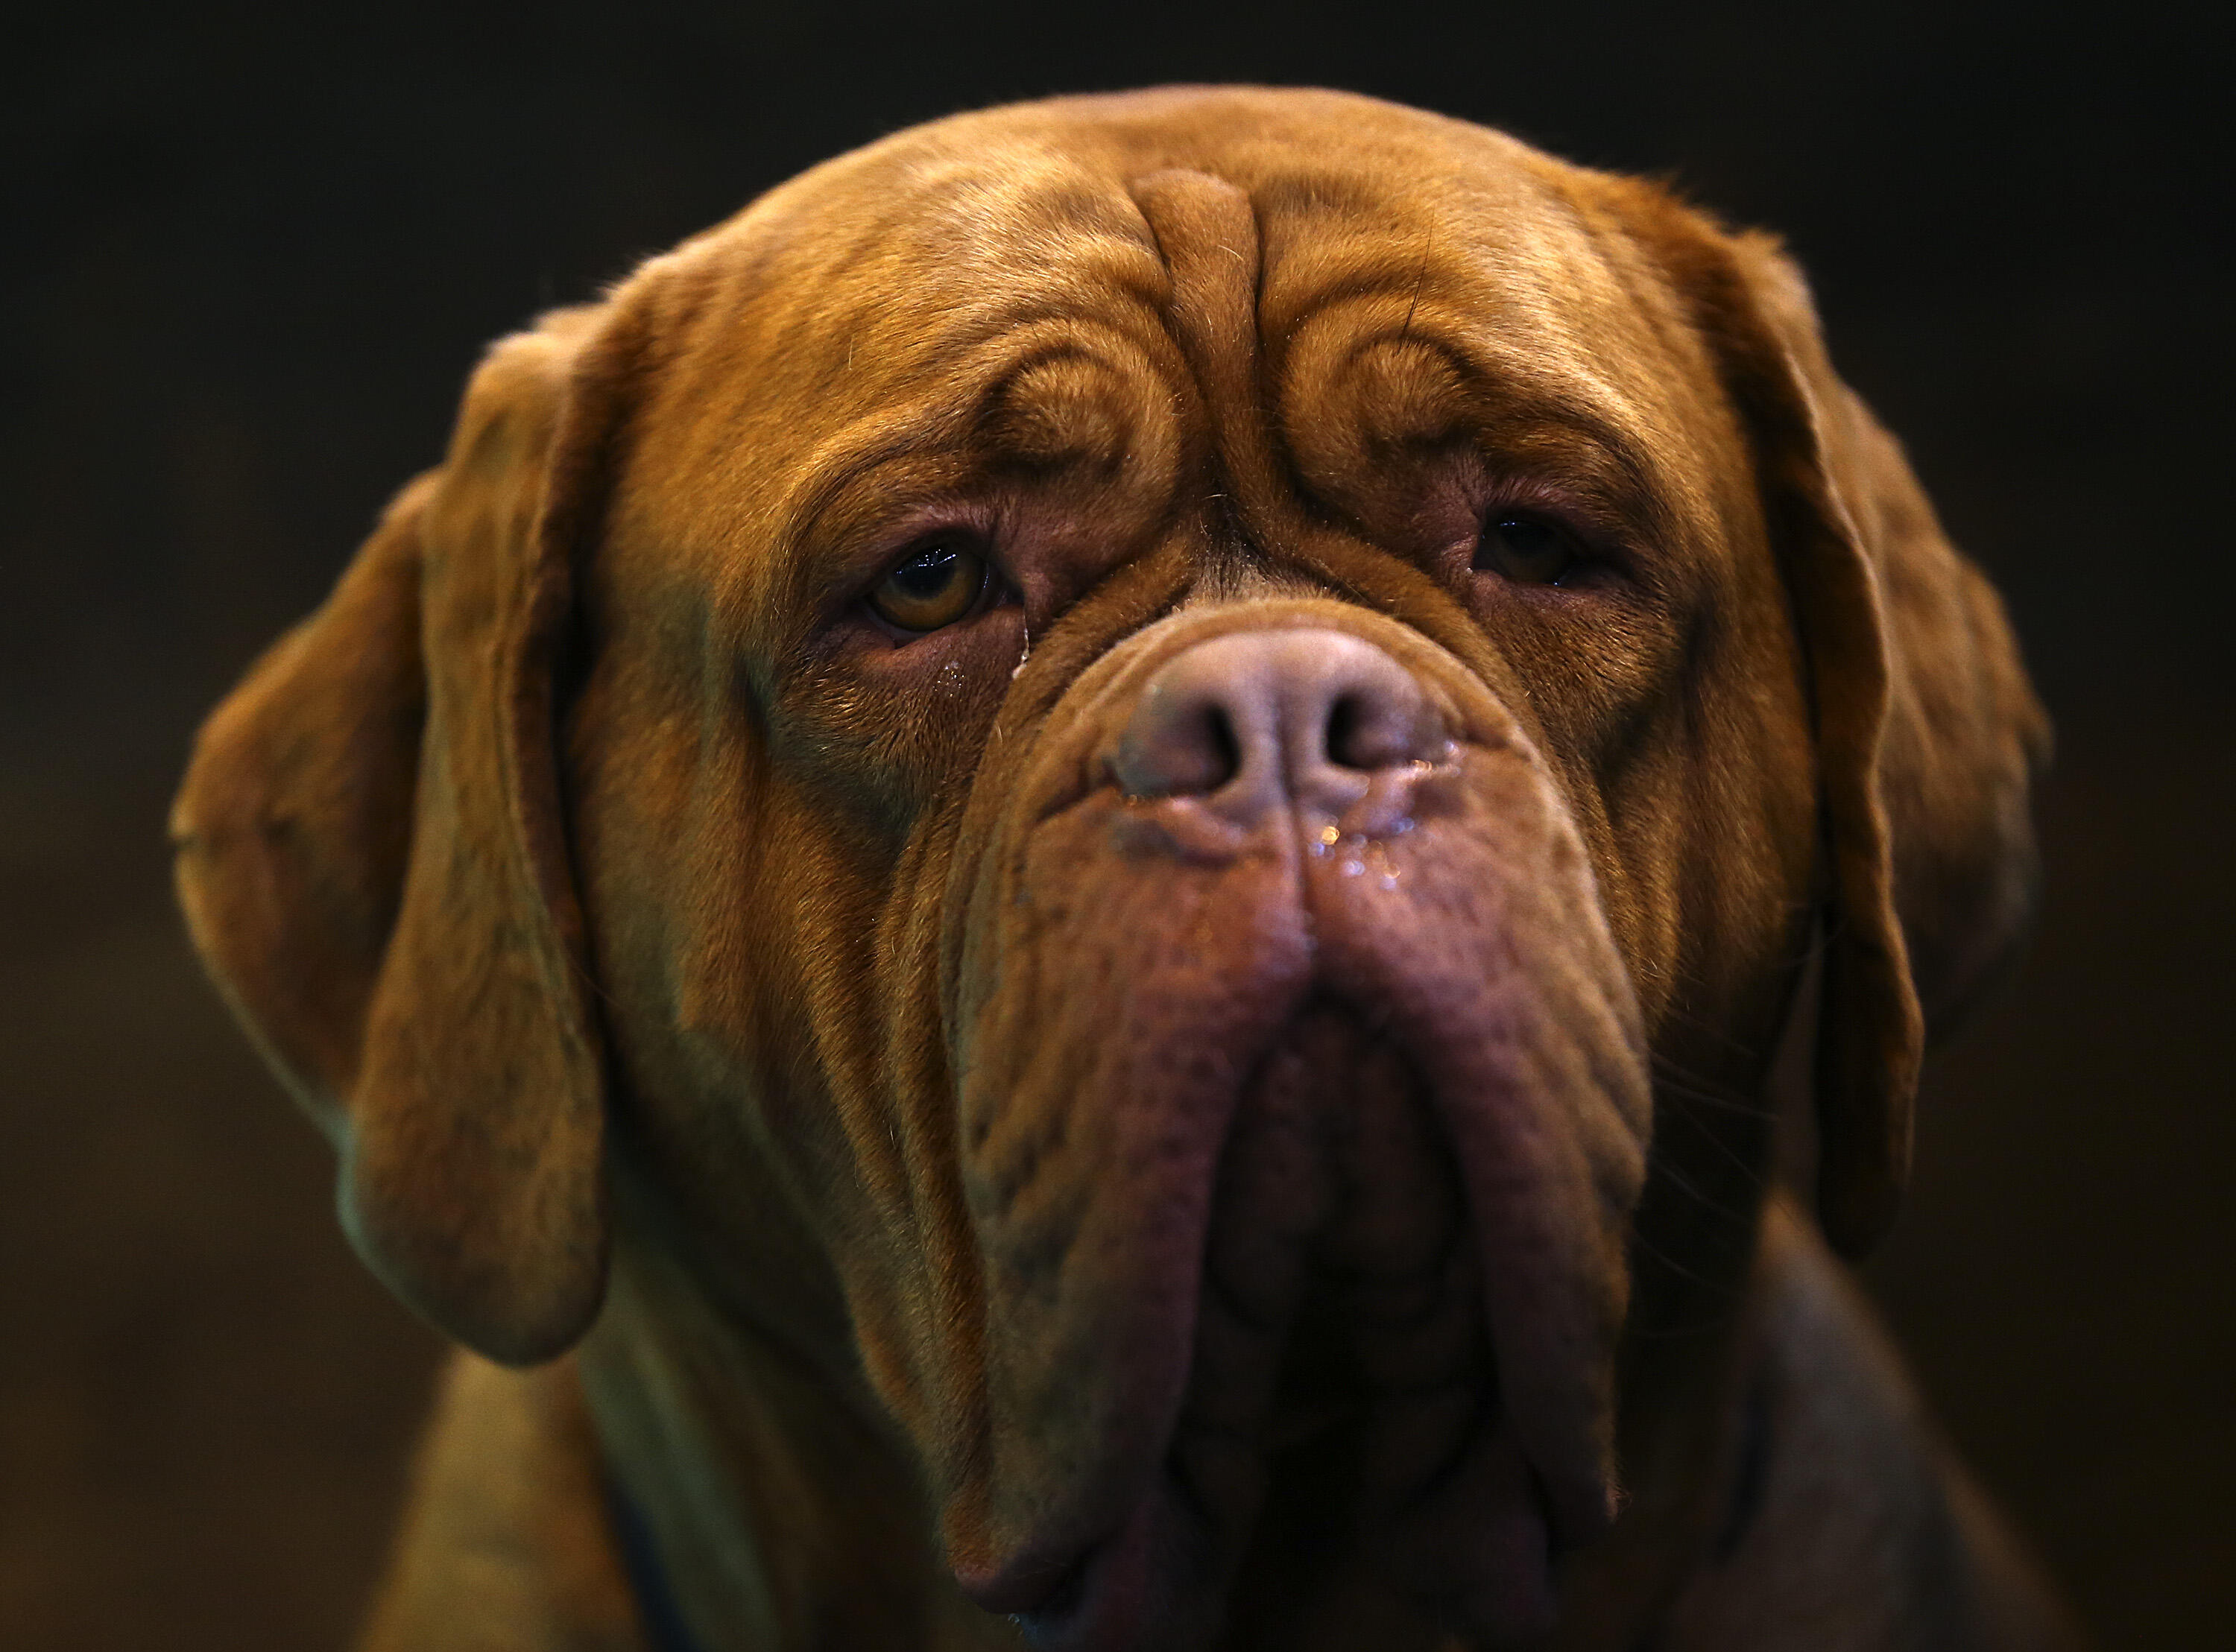 BIRMINGHAM, ENGLAND - MARCH 06: A Dogue De Bordeaux rests on the second day of Crufts dog show at the National Exhibition Centre on March 6, 2015 in Birmingham, England. First held in 1891, Crufts is said to be the largest show of its kind in the world, t